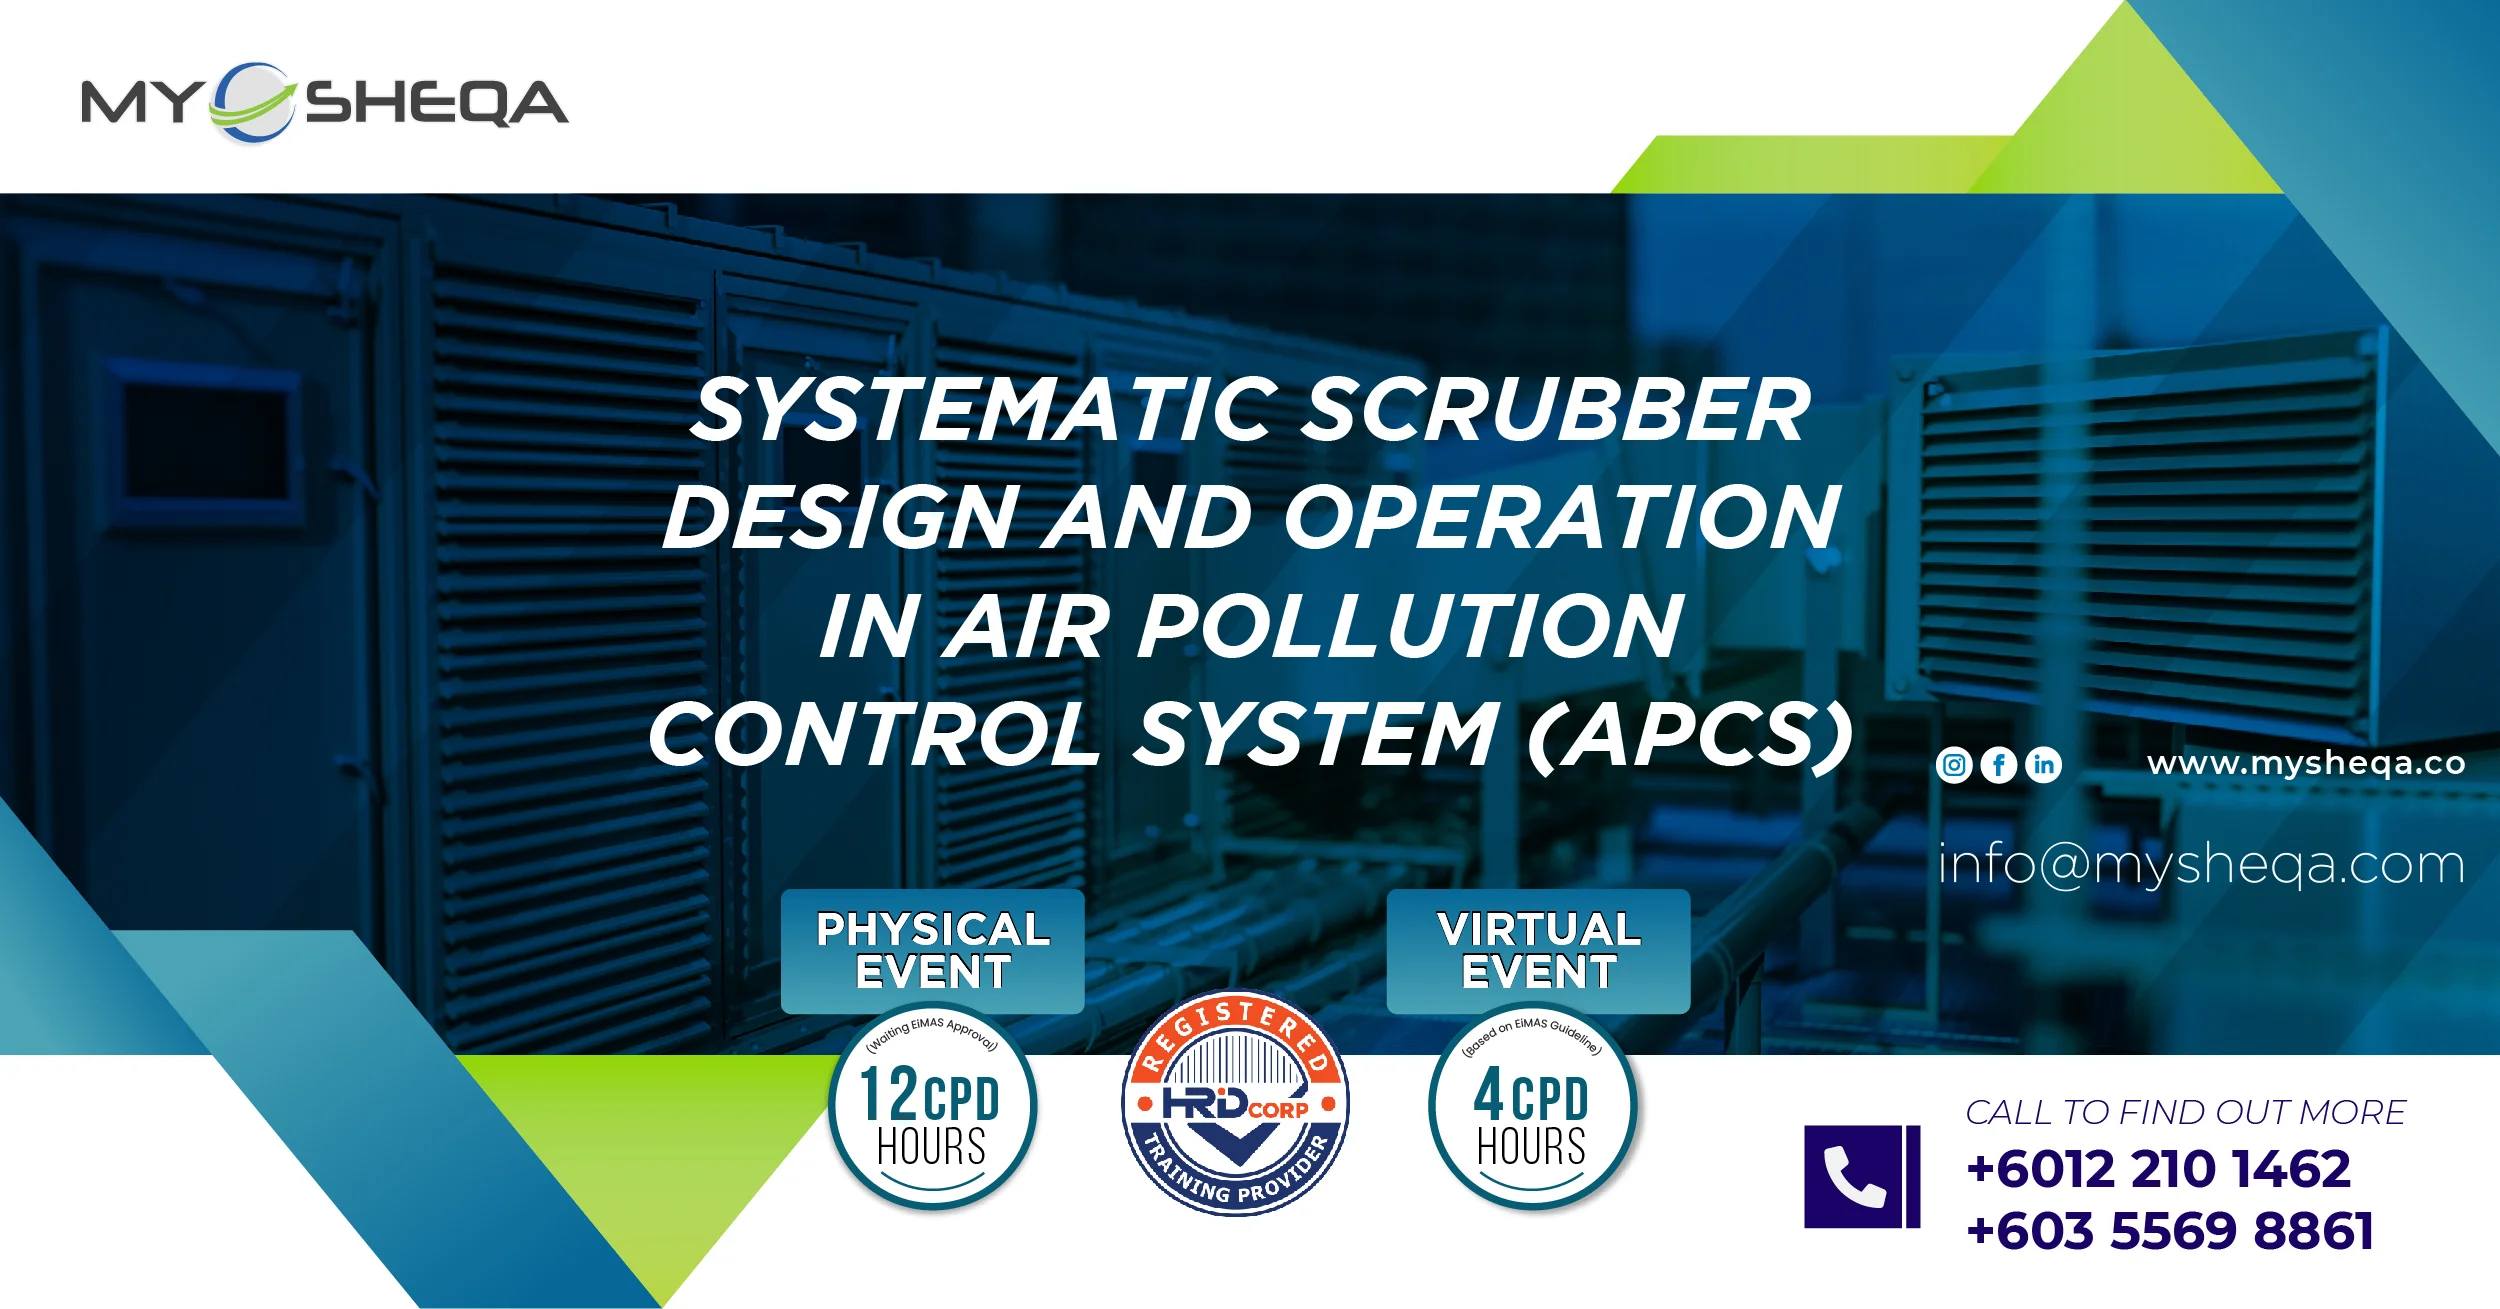 Systematic Scrubber Design and Operation in Air Pollution Control System (APCS)